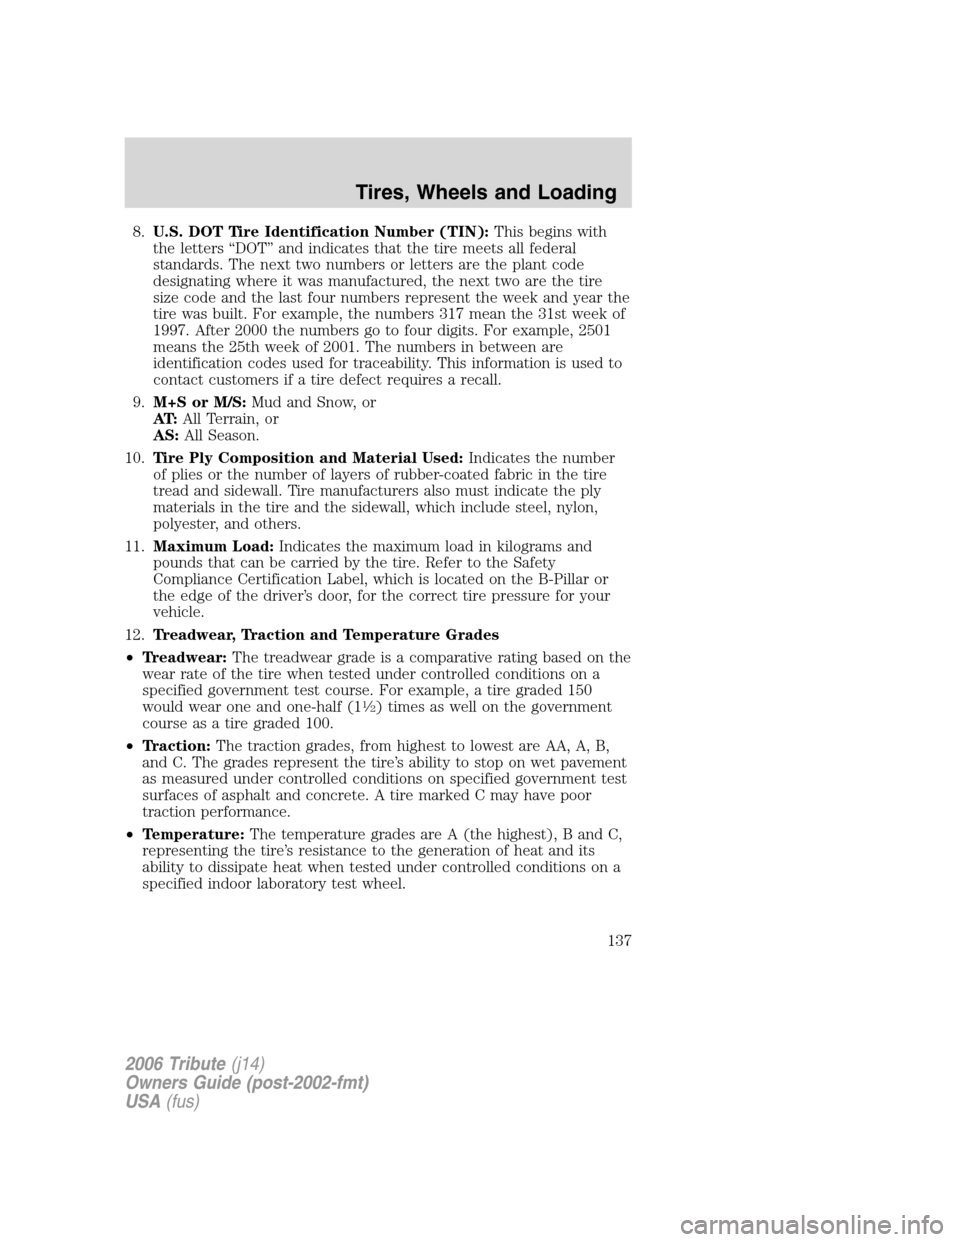 MAZDA MODEL TRIBUTE 2006  Owners Manual (in English) 8.U.S. DOT Tire Identification Number (TIN):This begins with
the letters “DOT” and indicates that the tire meets all federal
standards. The next two numbers or letters are the plant code
designati